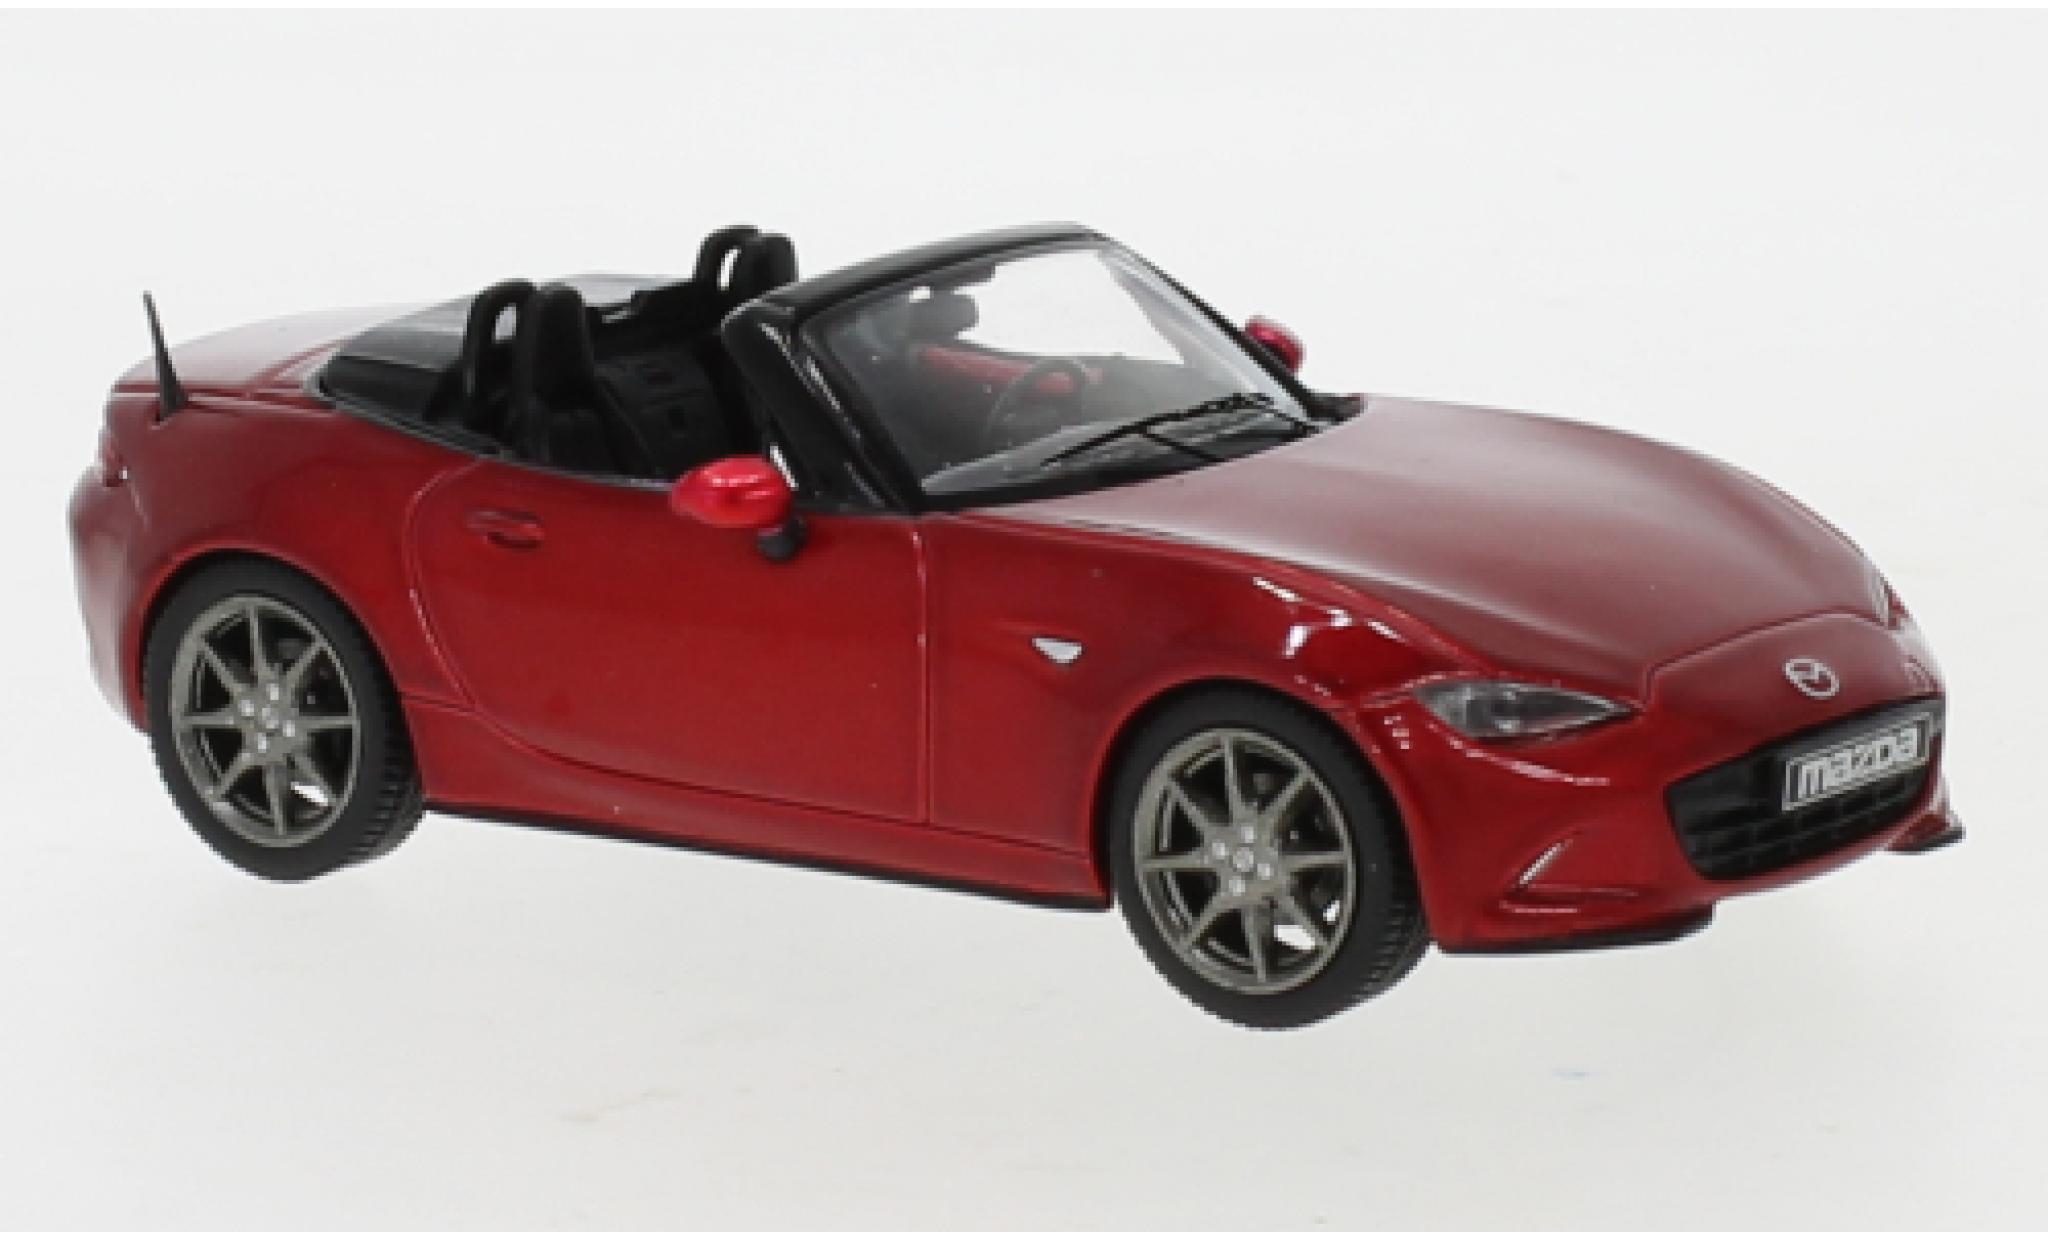 https://www.alldiecast.us/images/images_miniatures/ixo-mazda-mx-5-roadster-selection-nd-metallic-dunkelrot-2016-1.jpg